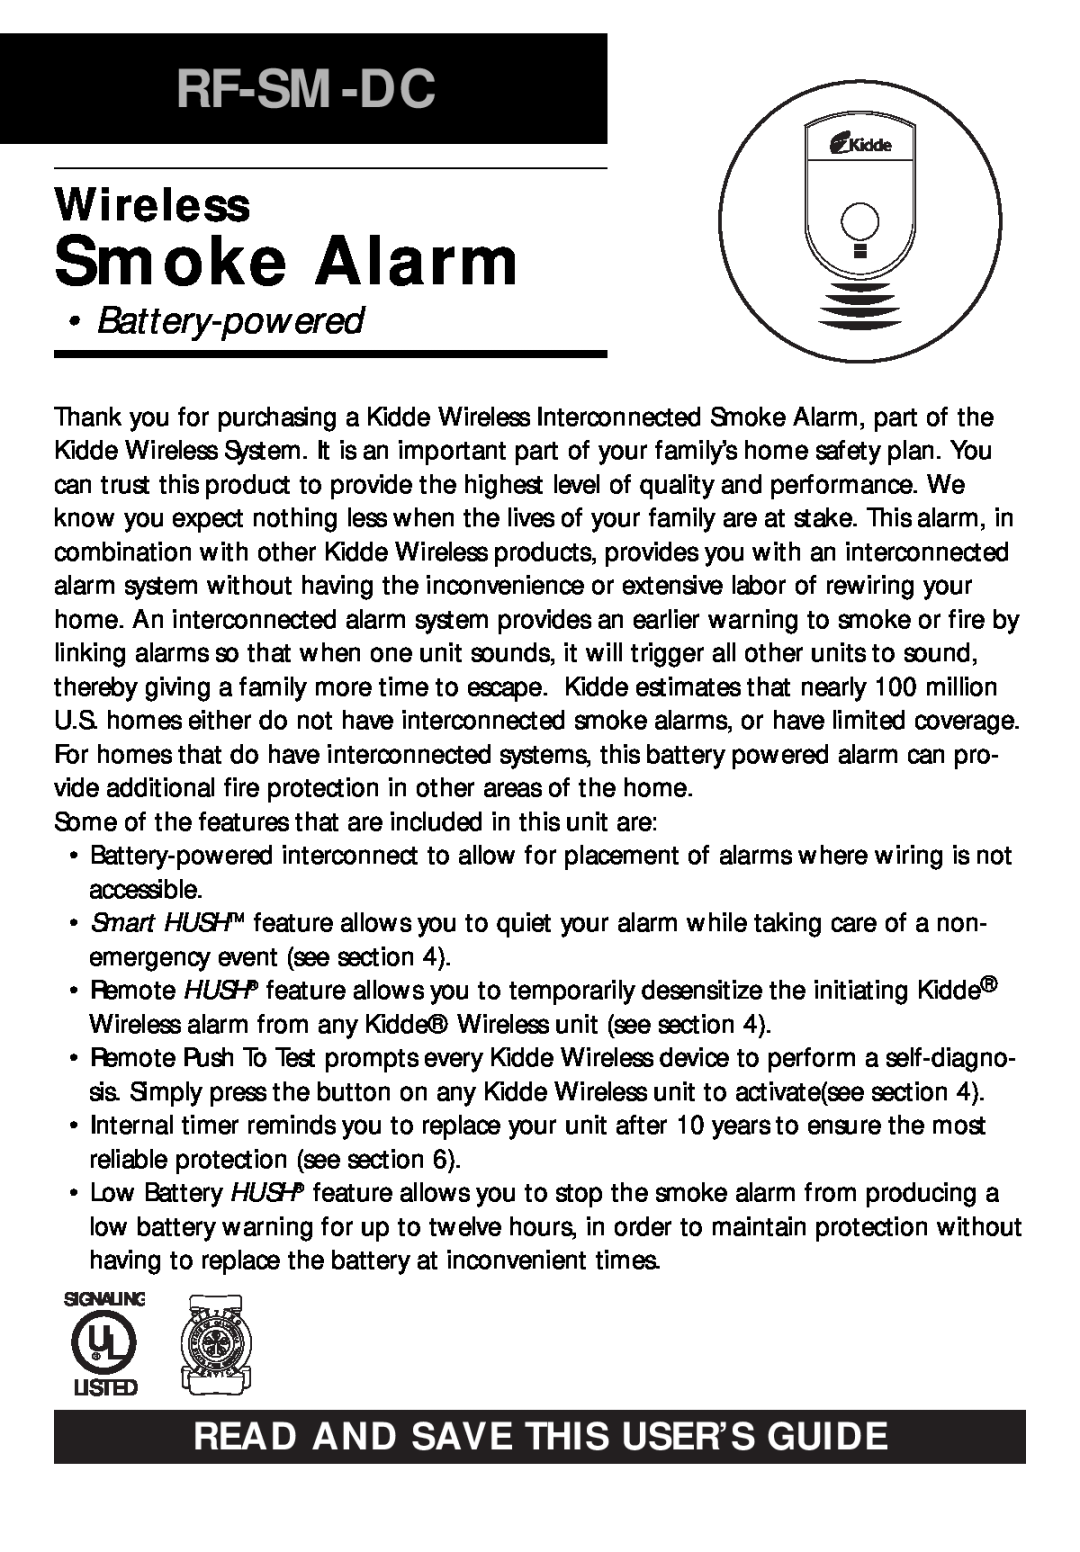 Kidde RF-SM-DC manual Smoke Alarm, Rf-Sm-Dc, Wireless, Battery-powered, Read And Save This User’S Guide 